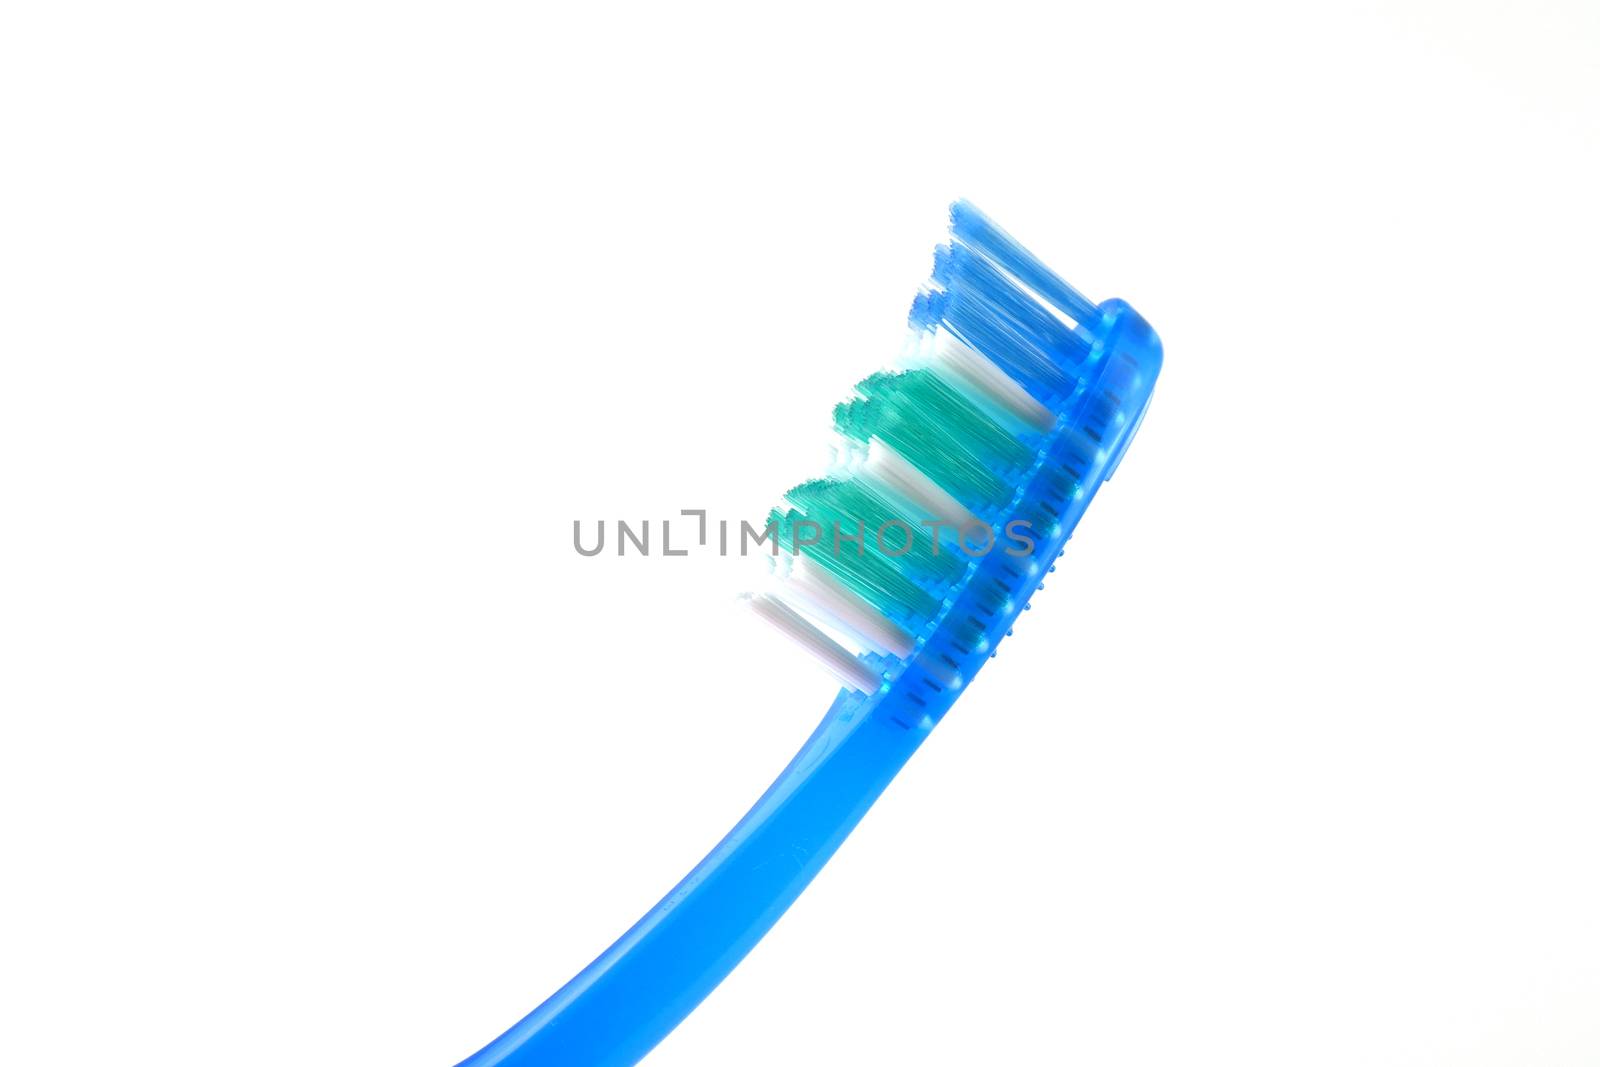 Tooth-brush over white by sergpet